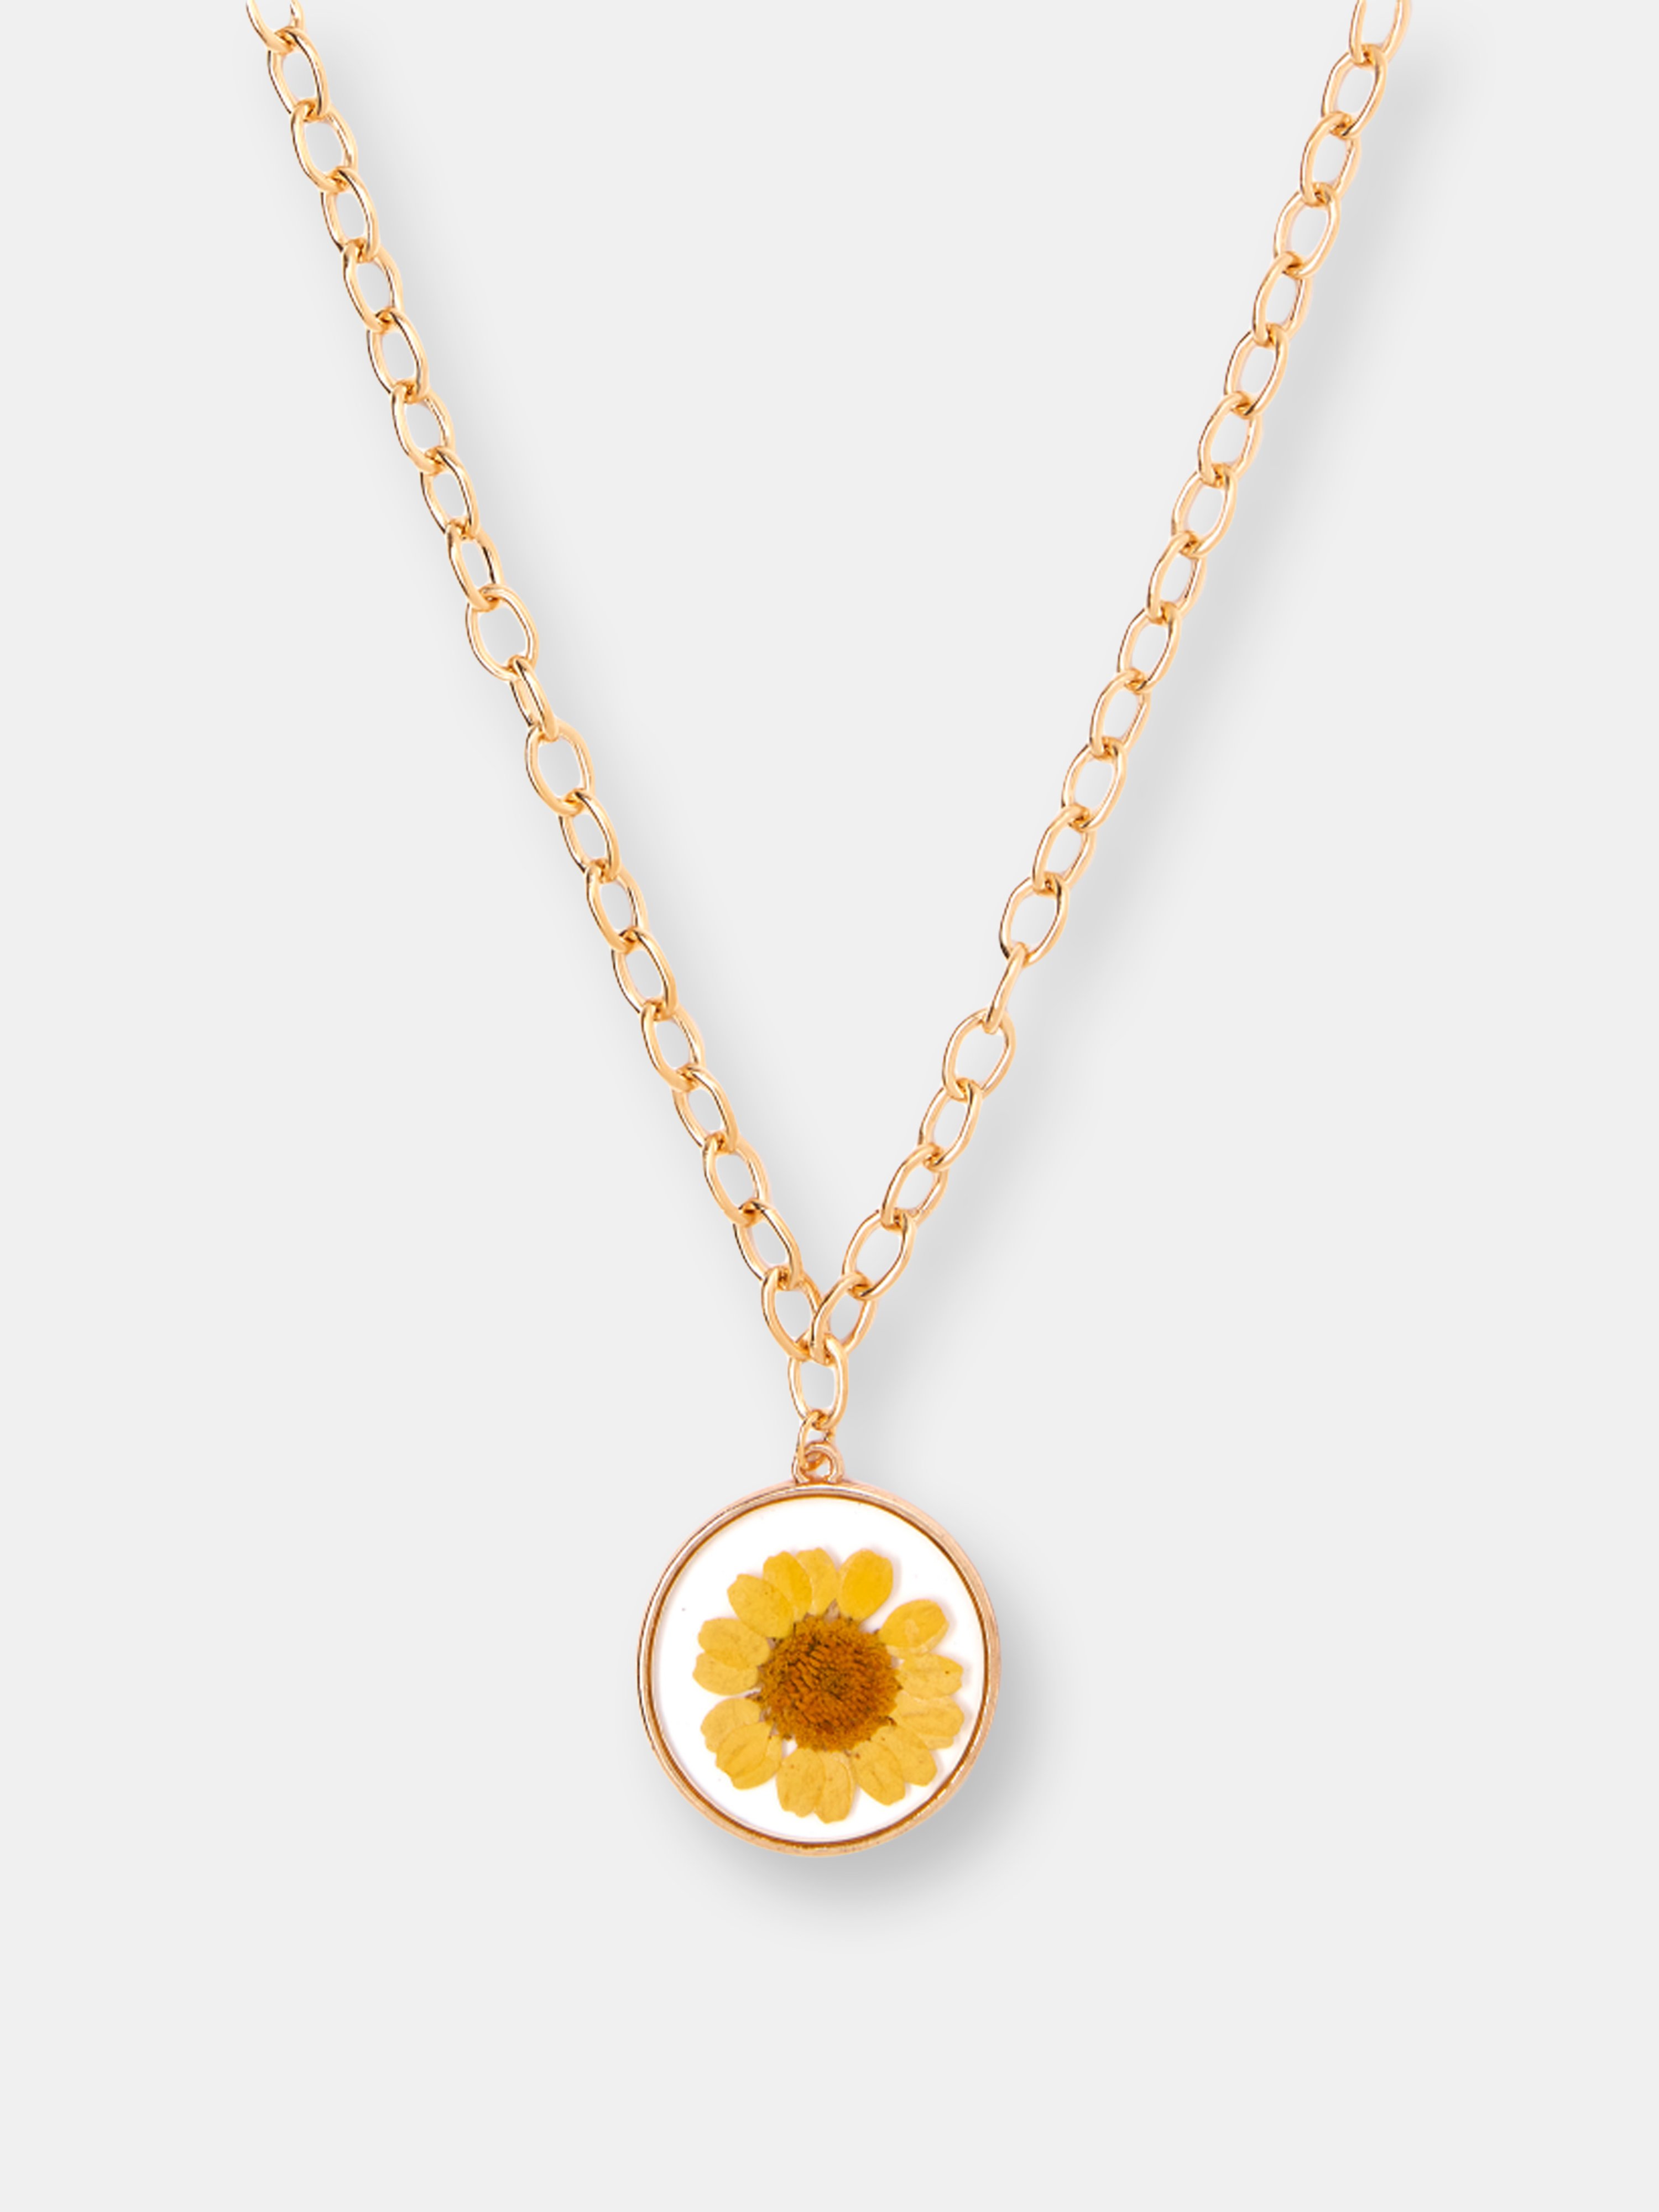 TESS + TRICIA TESS + TRICIA LARGE YELLOW DAISY NECKLACE